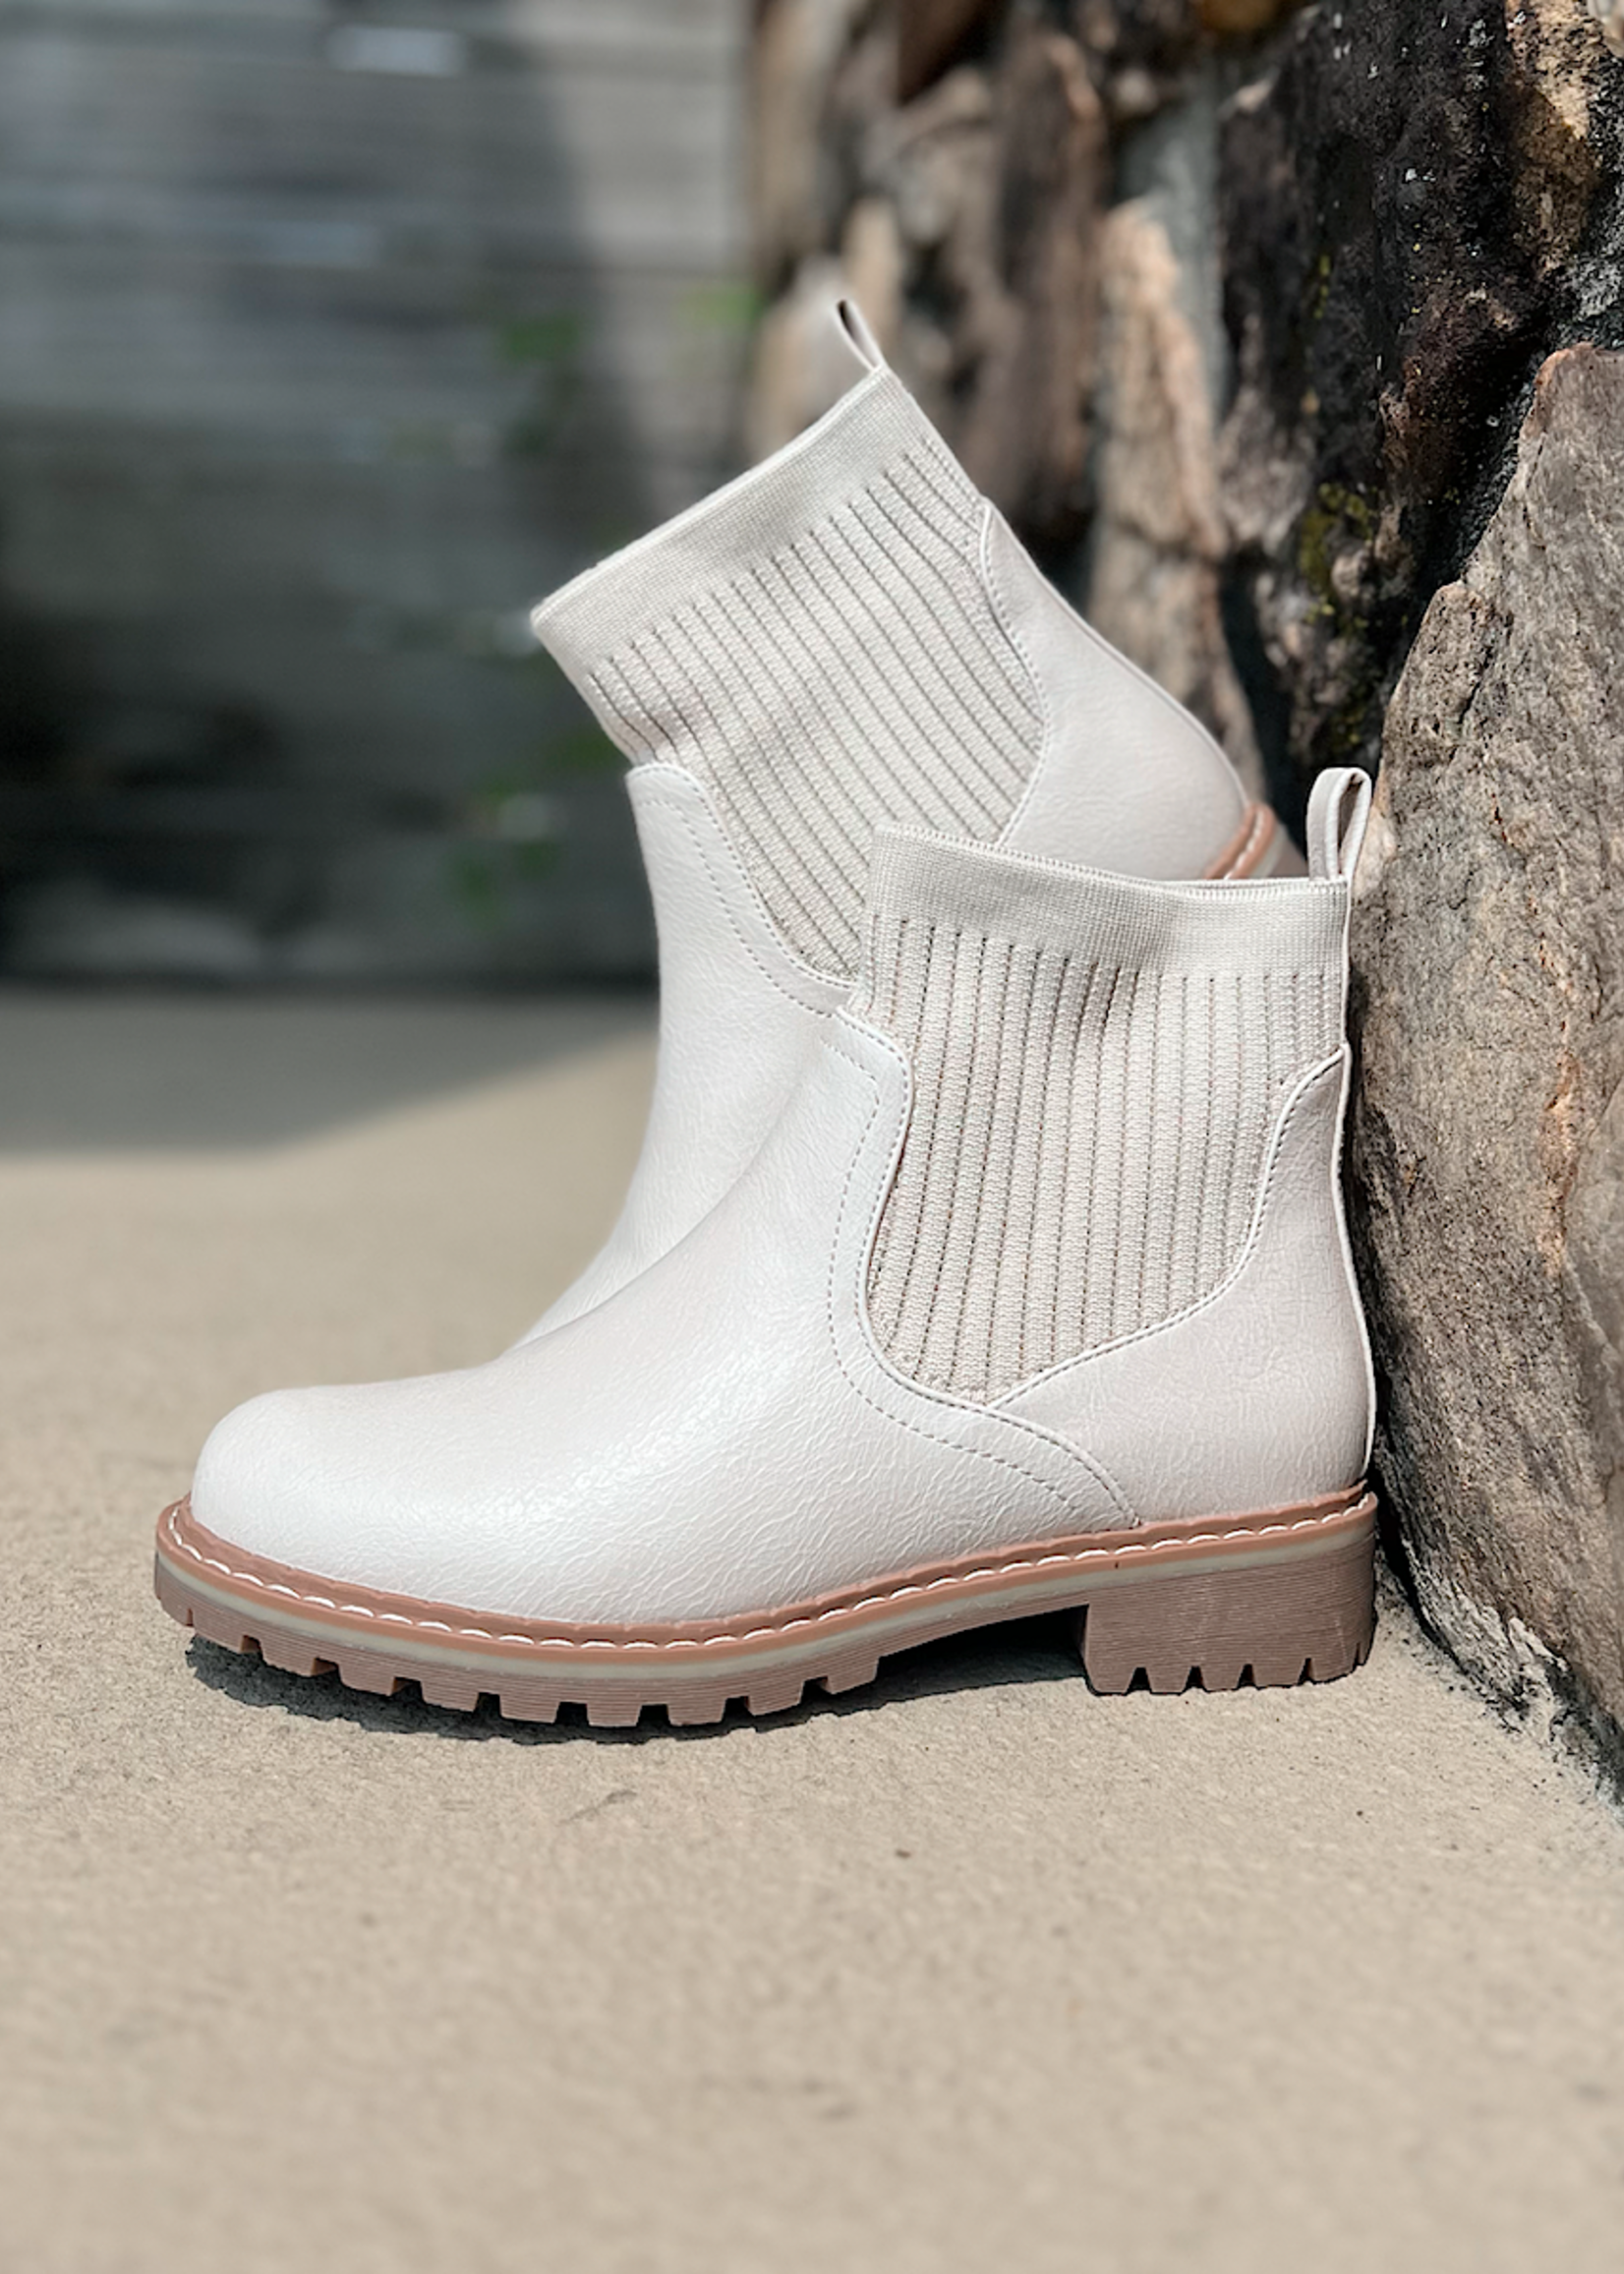 Corkys Corkys Cabin Fever Cream Boots